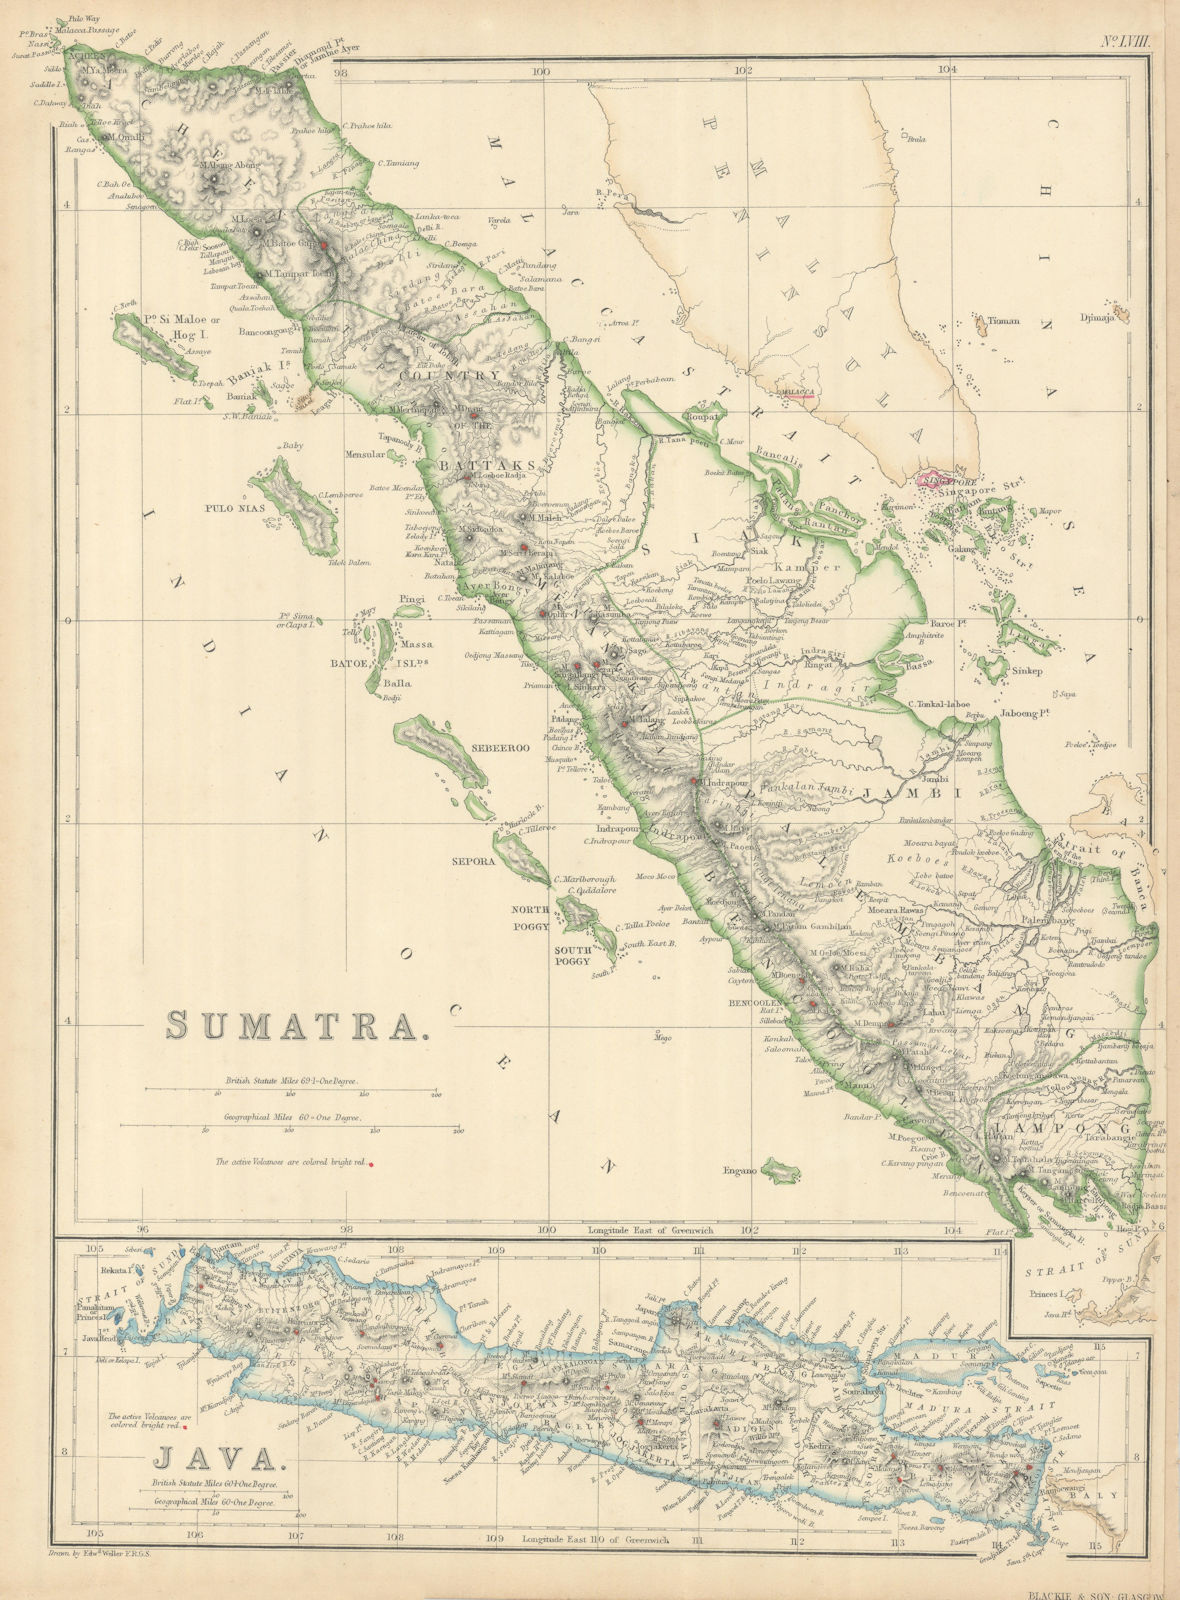 Sumatra & Java showing volcanoes by Edward Weller. Indonesia 1860 old map